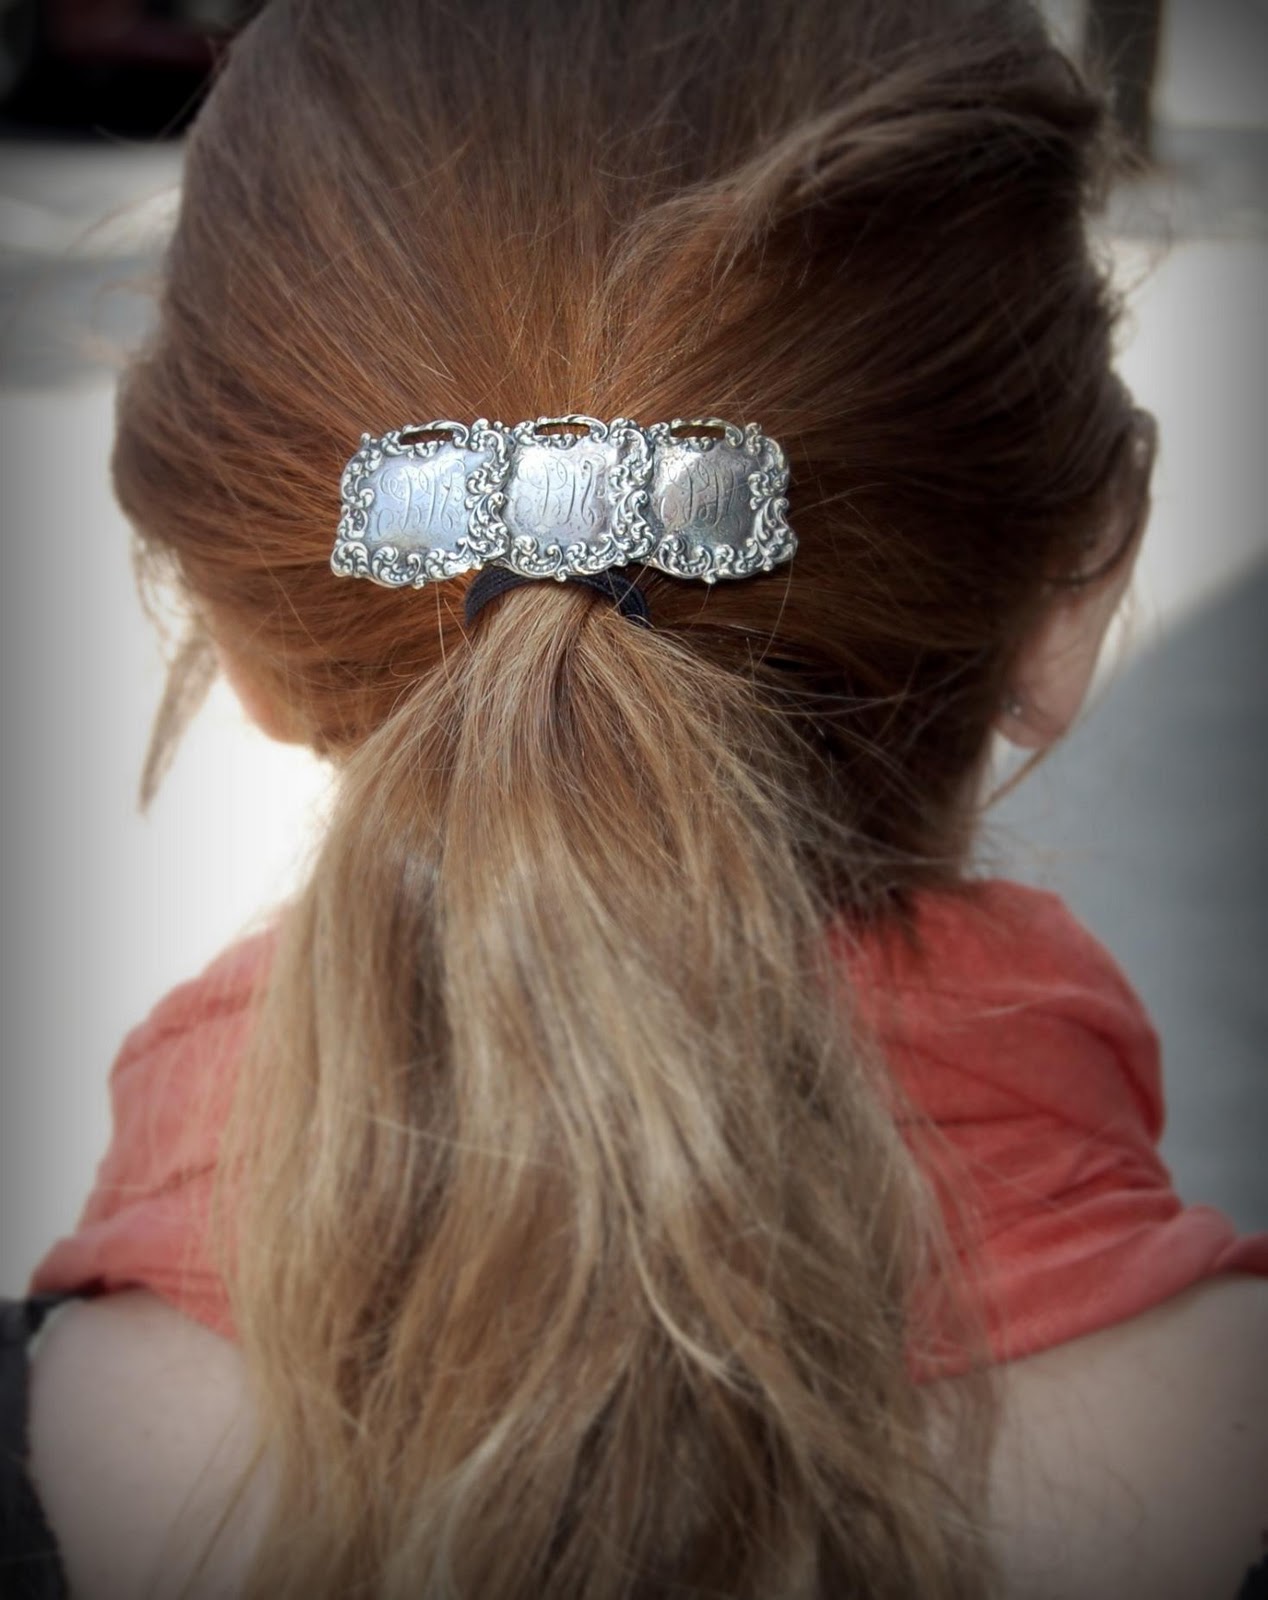 Jeweled Hair Accessories: Add title=